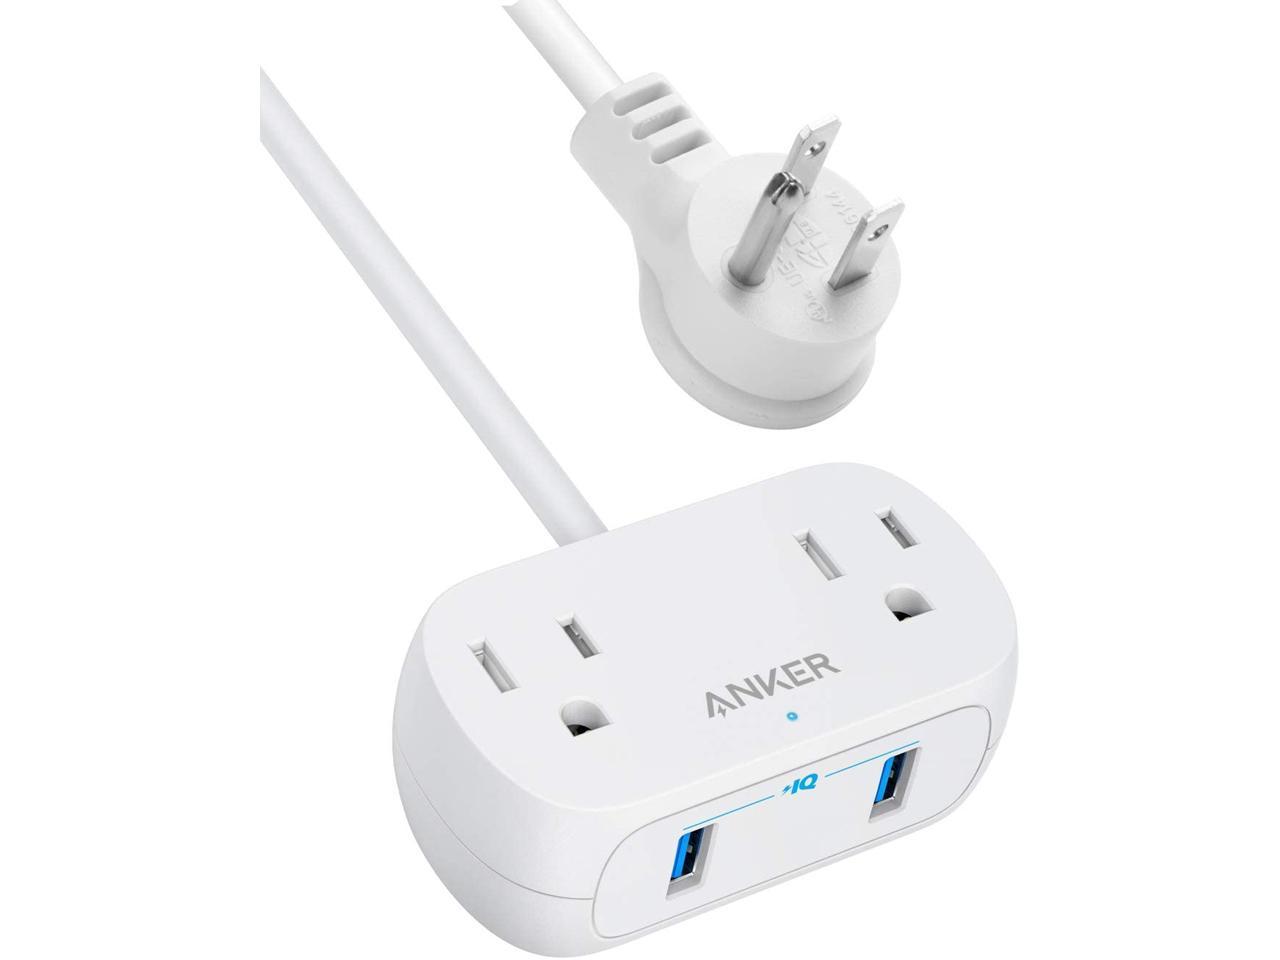 Anker Power Strip with USB PowerExtend USB 2 mini, 2 Outlets, and 2 USB Ports $10